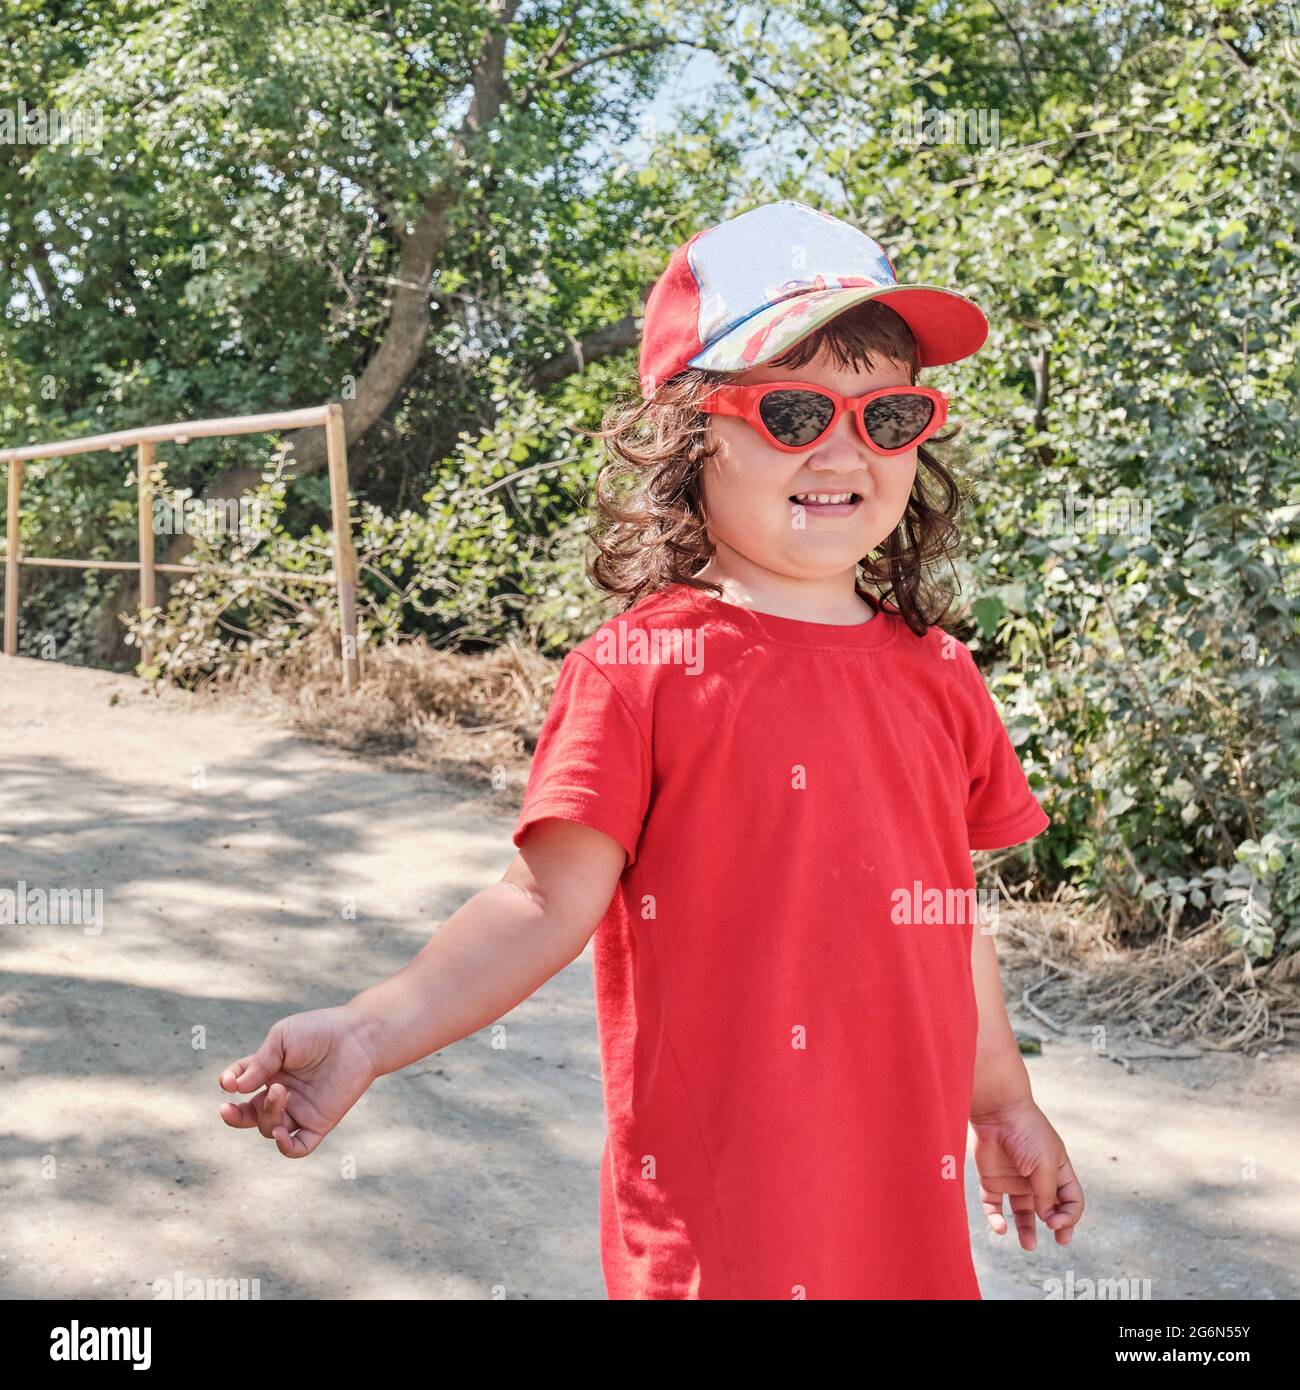 Portrait of a little Asian girl in a red dress, red sunglasses and a baseball cap walking along the road and posing. Stock Photo